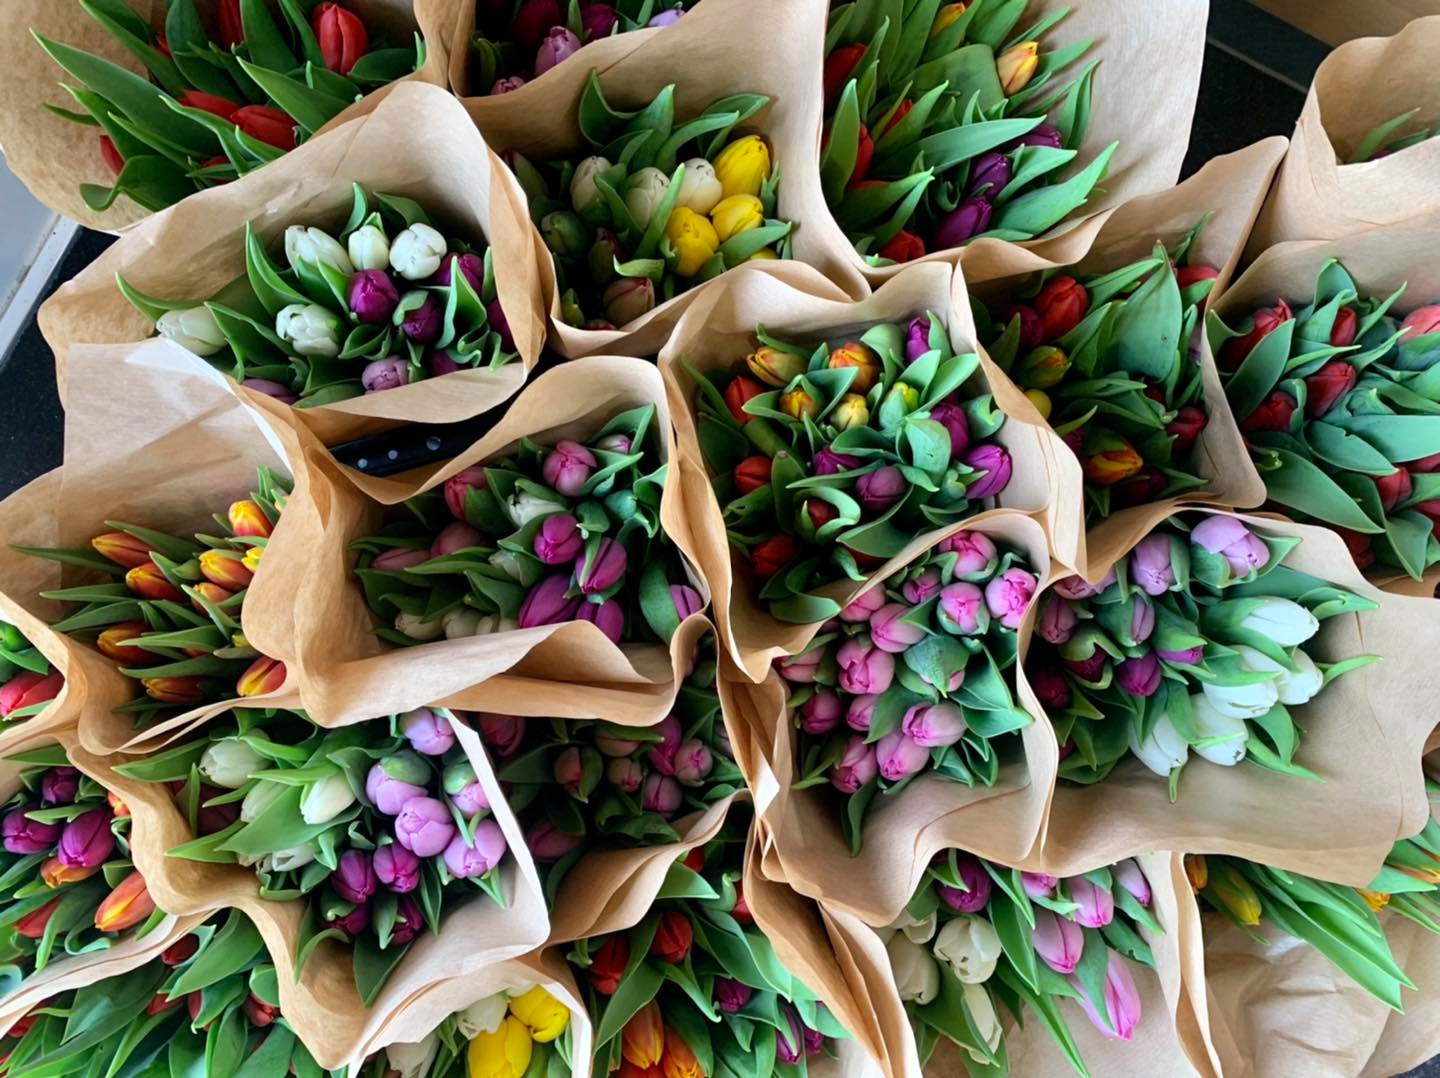 Tulips For Sale